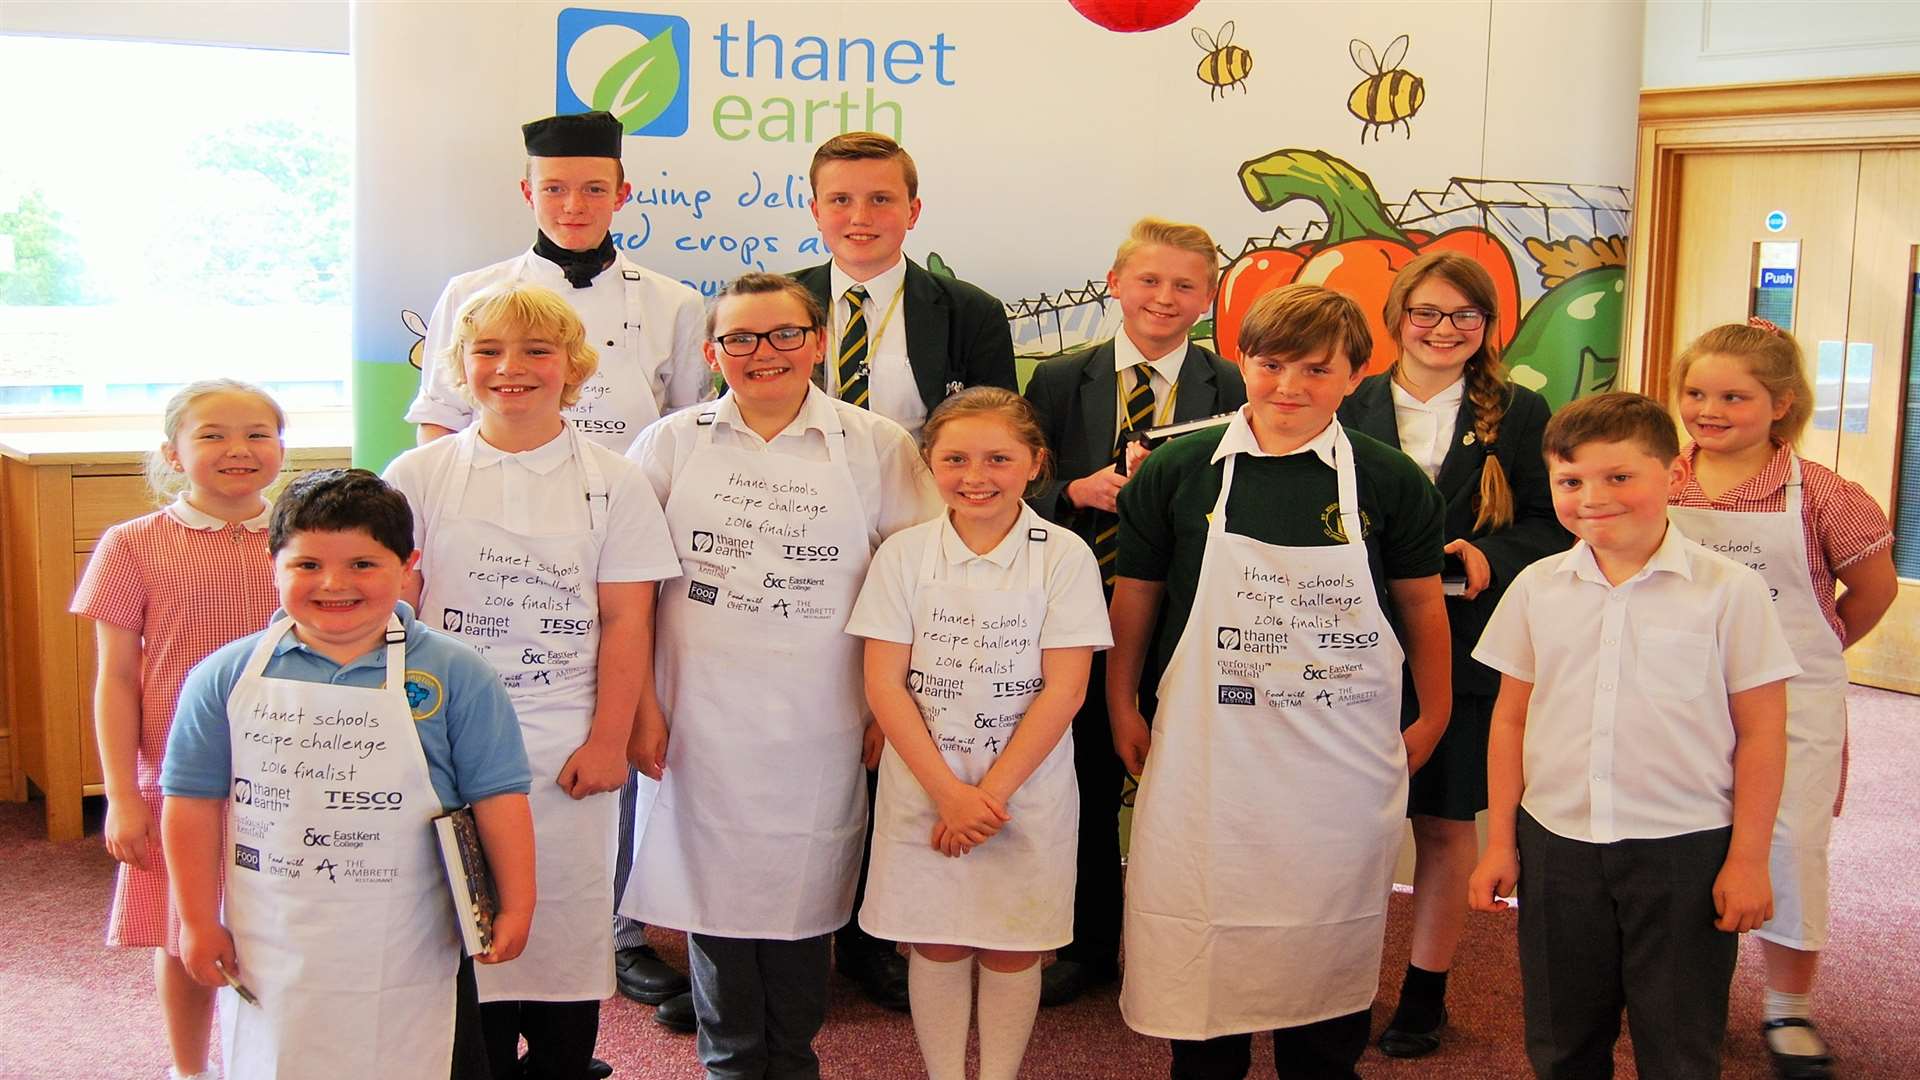 The 12 finalists represented a number of Thanet schools